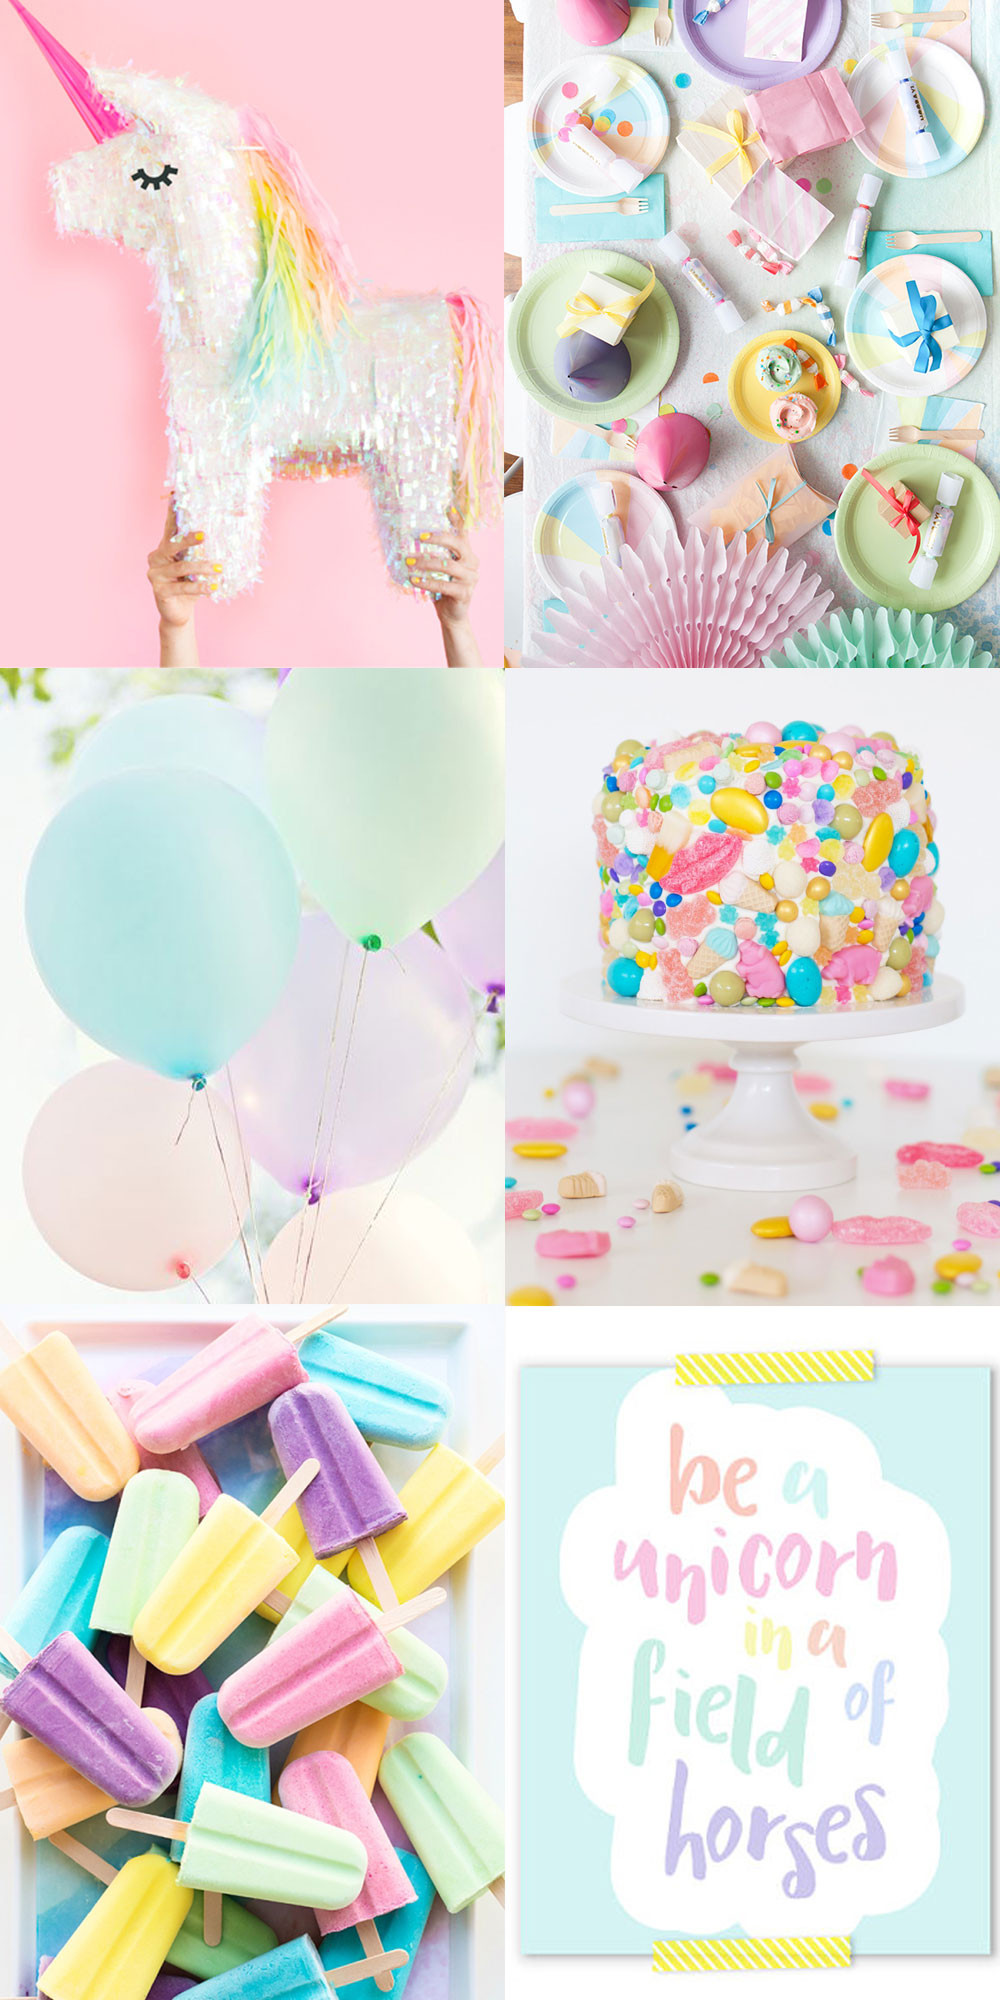 Ideas For Unicorn Party
 UNICORN PARTY INSPIRATION Tell Love and Party